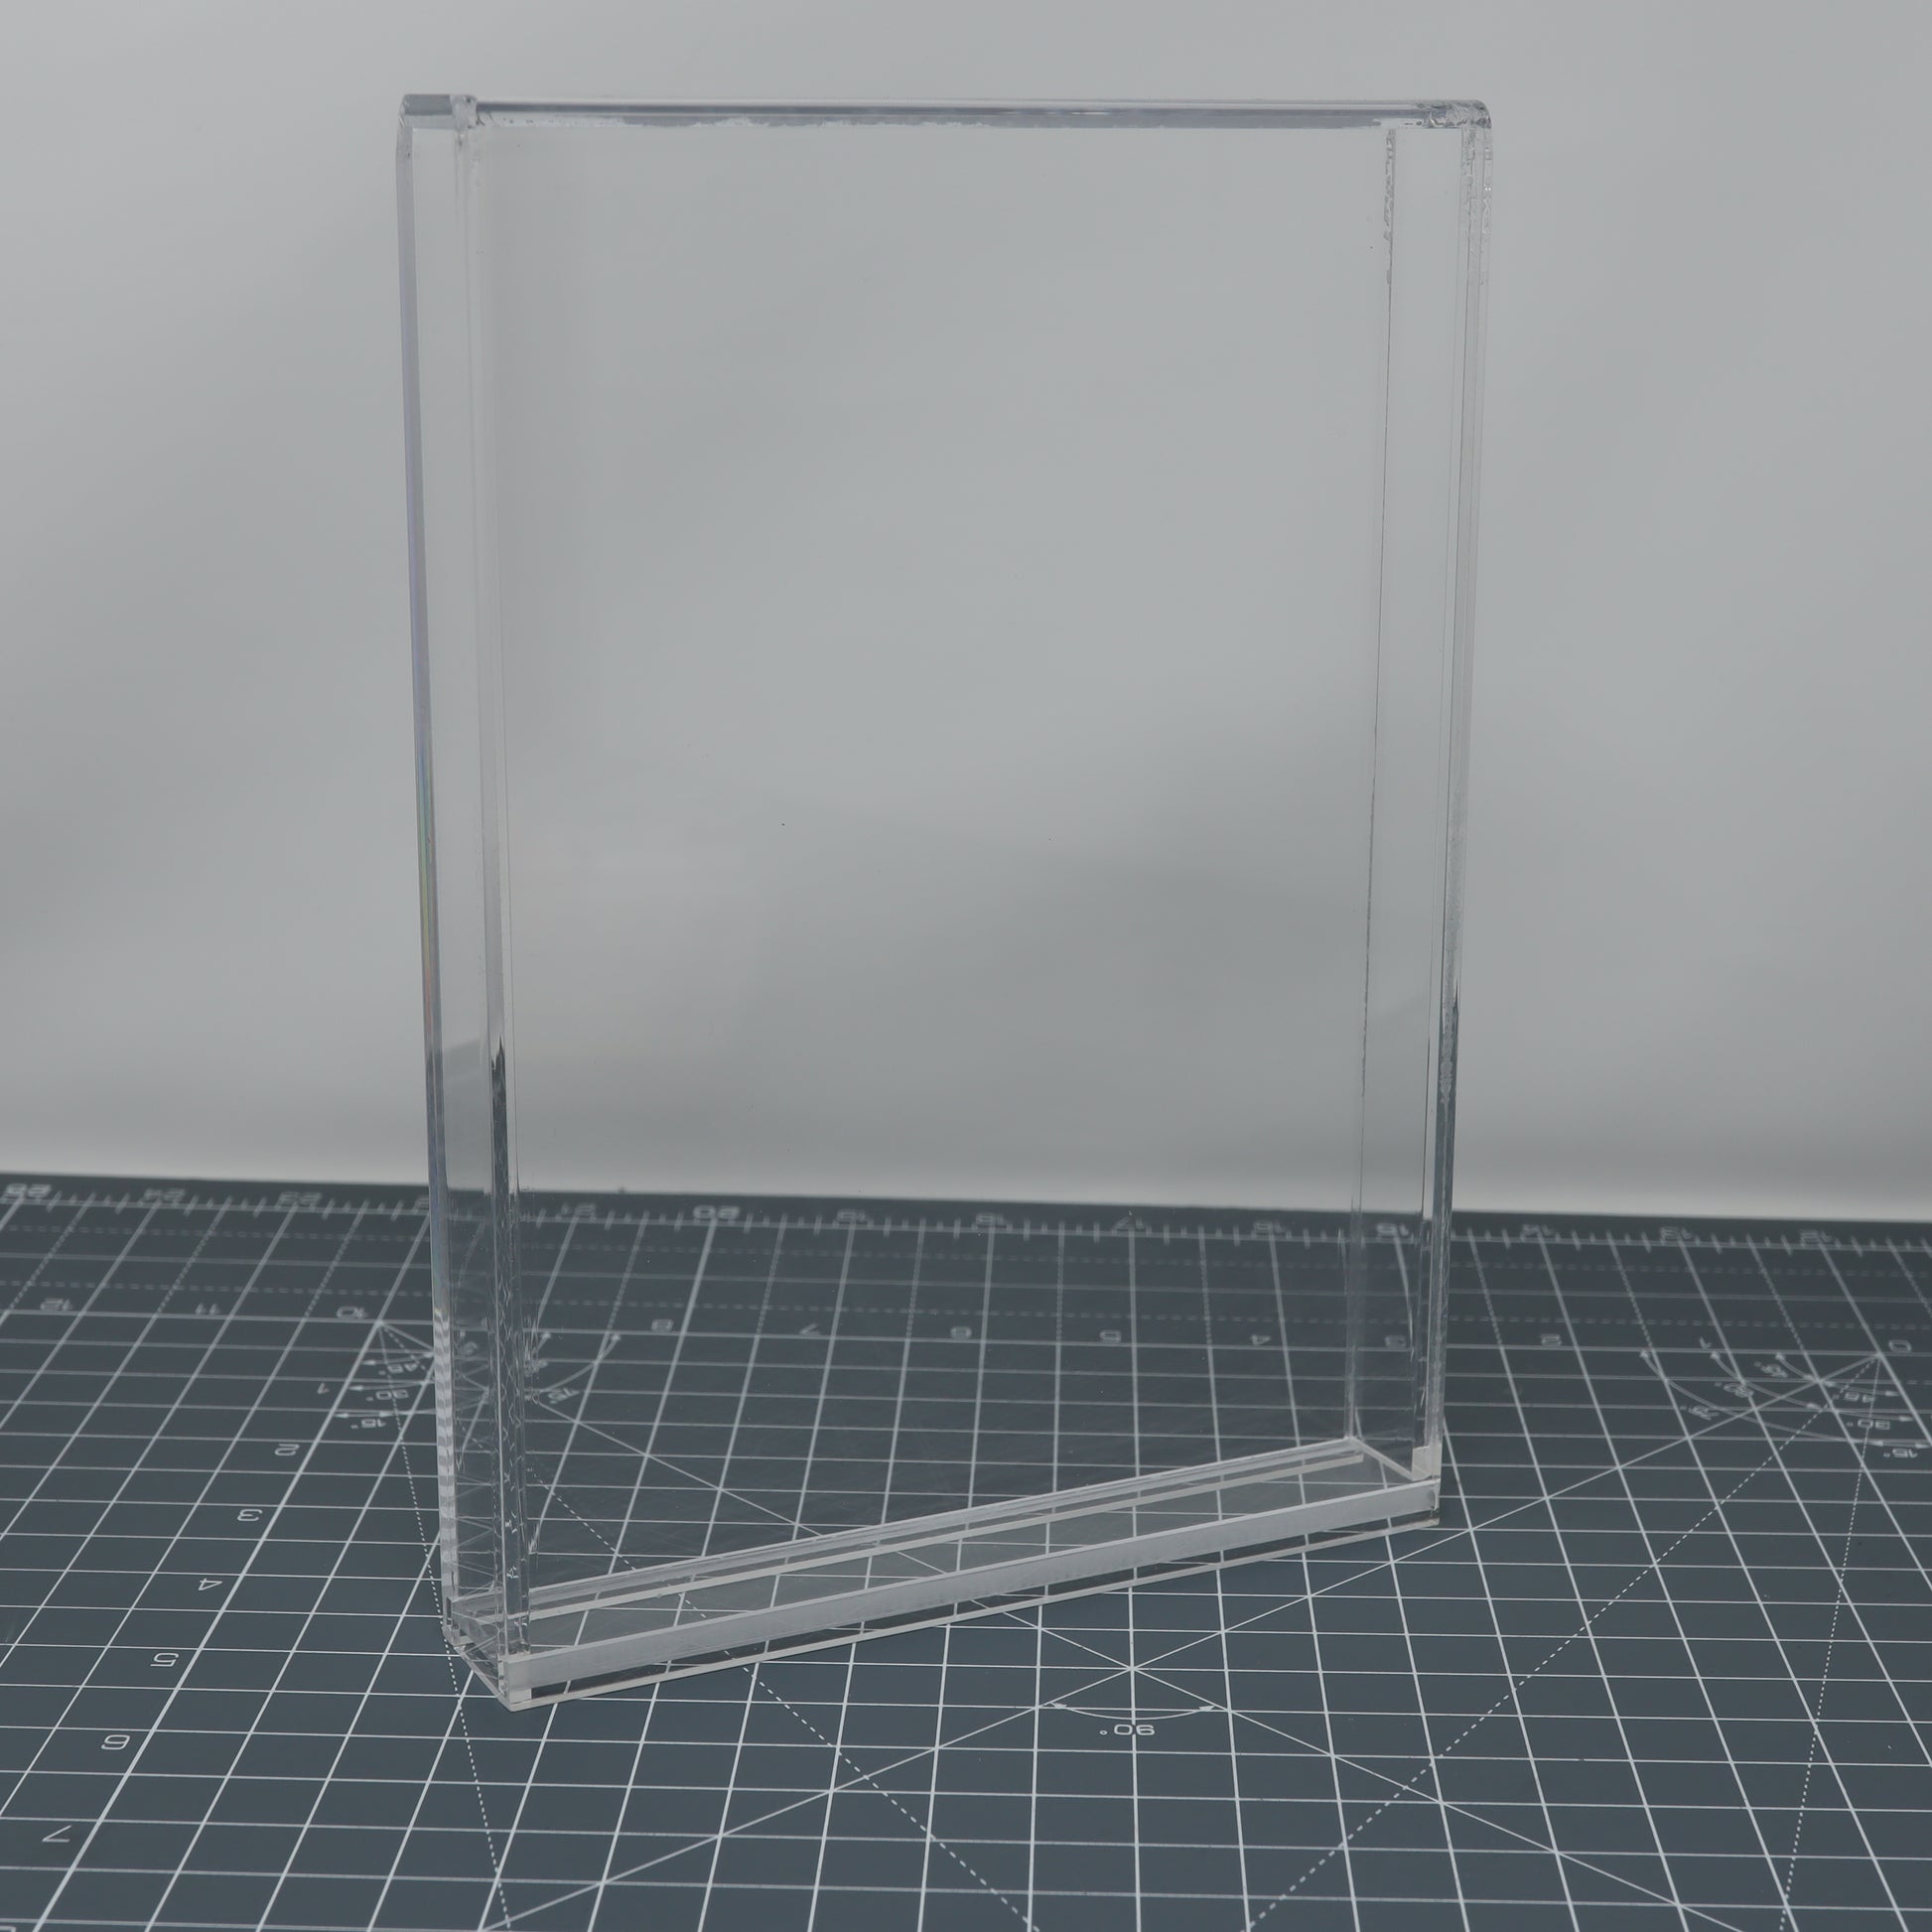 Lab Fifteen Co custom acrylic display capsule for Sony Playstation 2 game display case